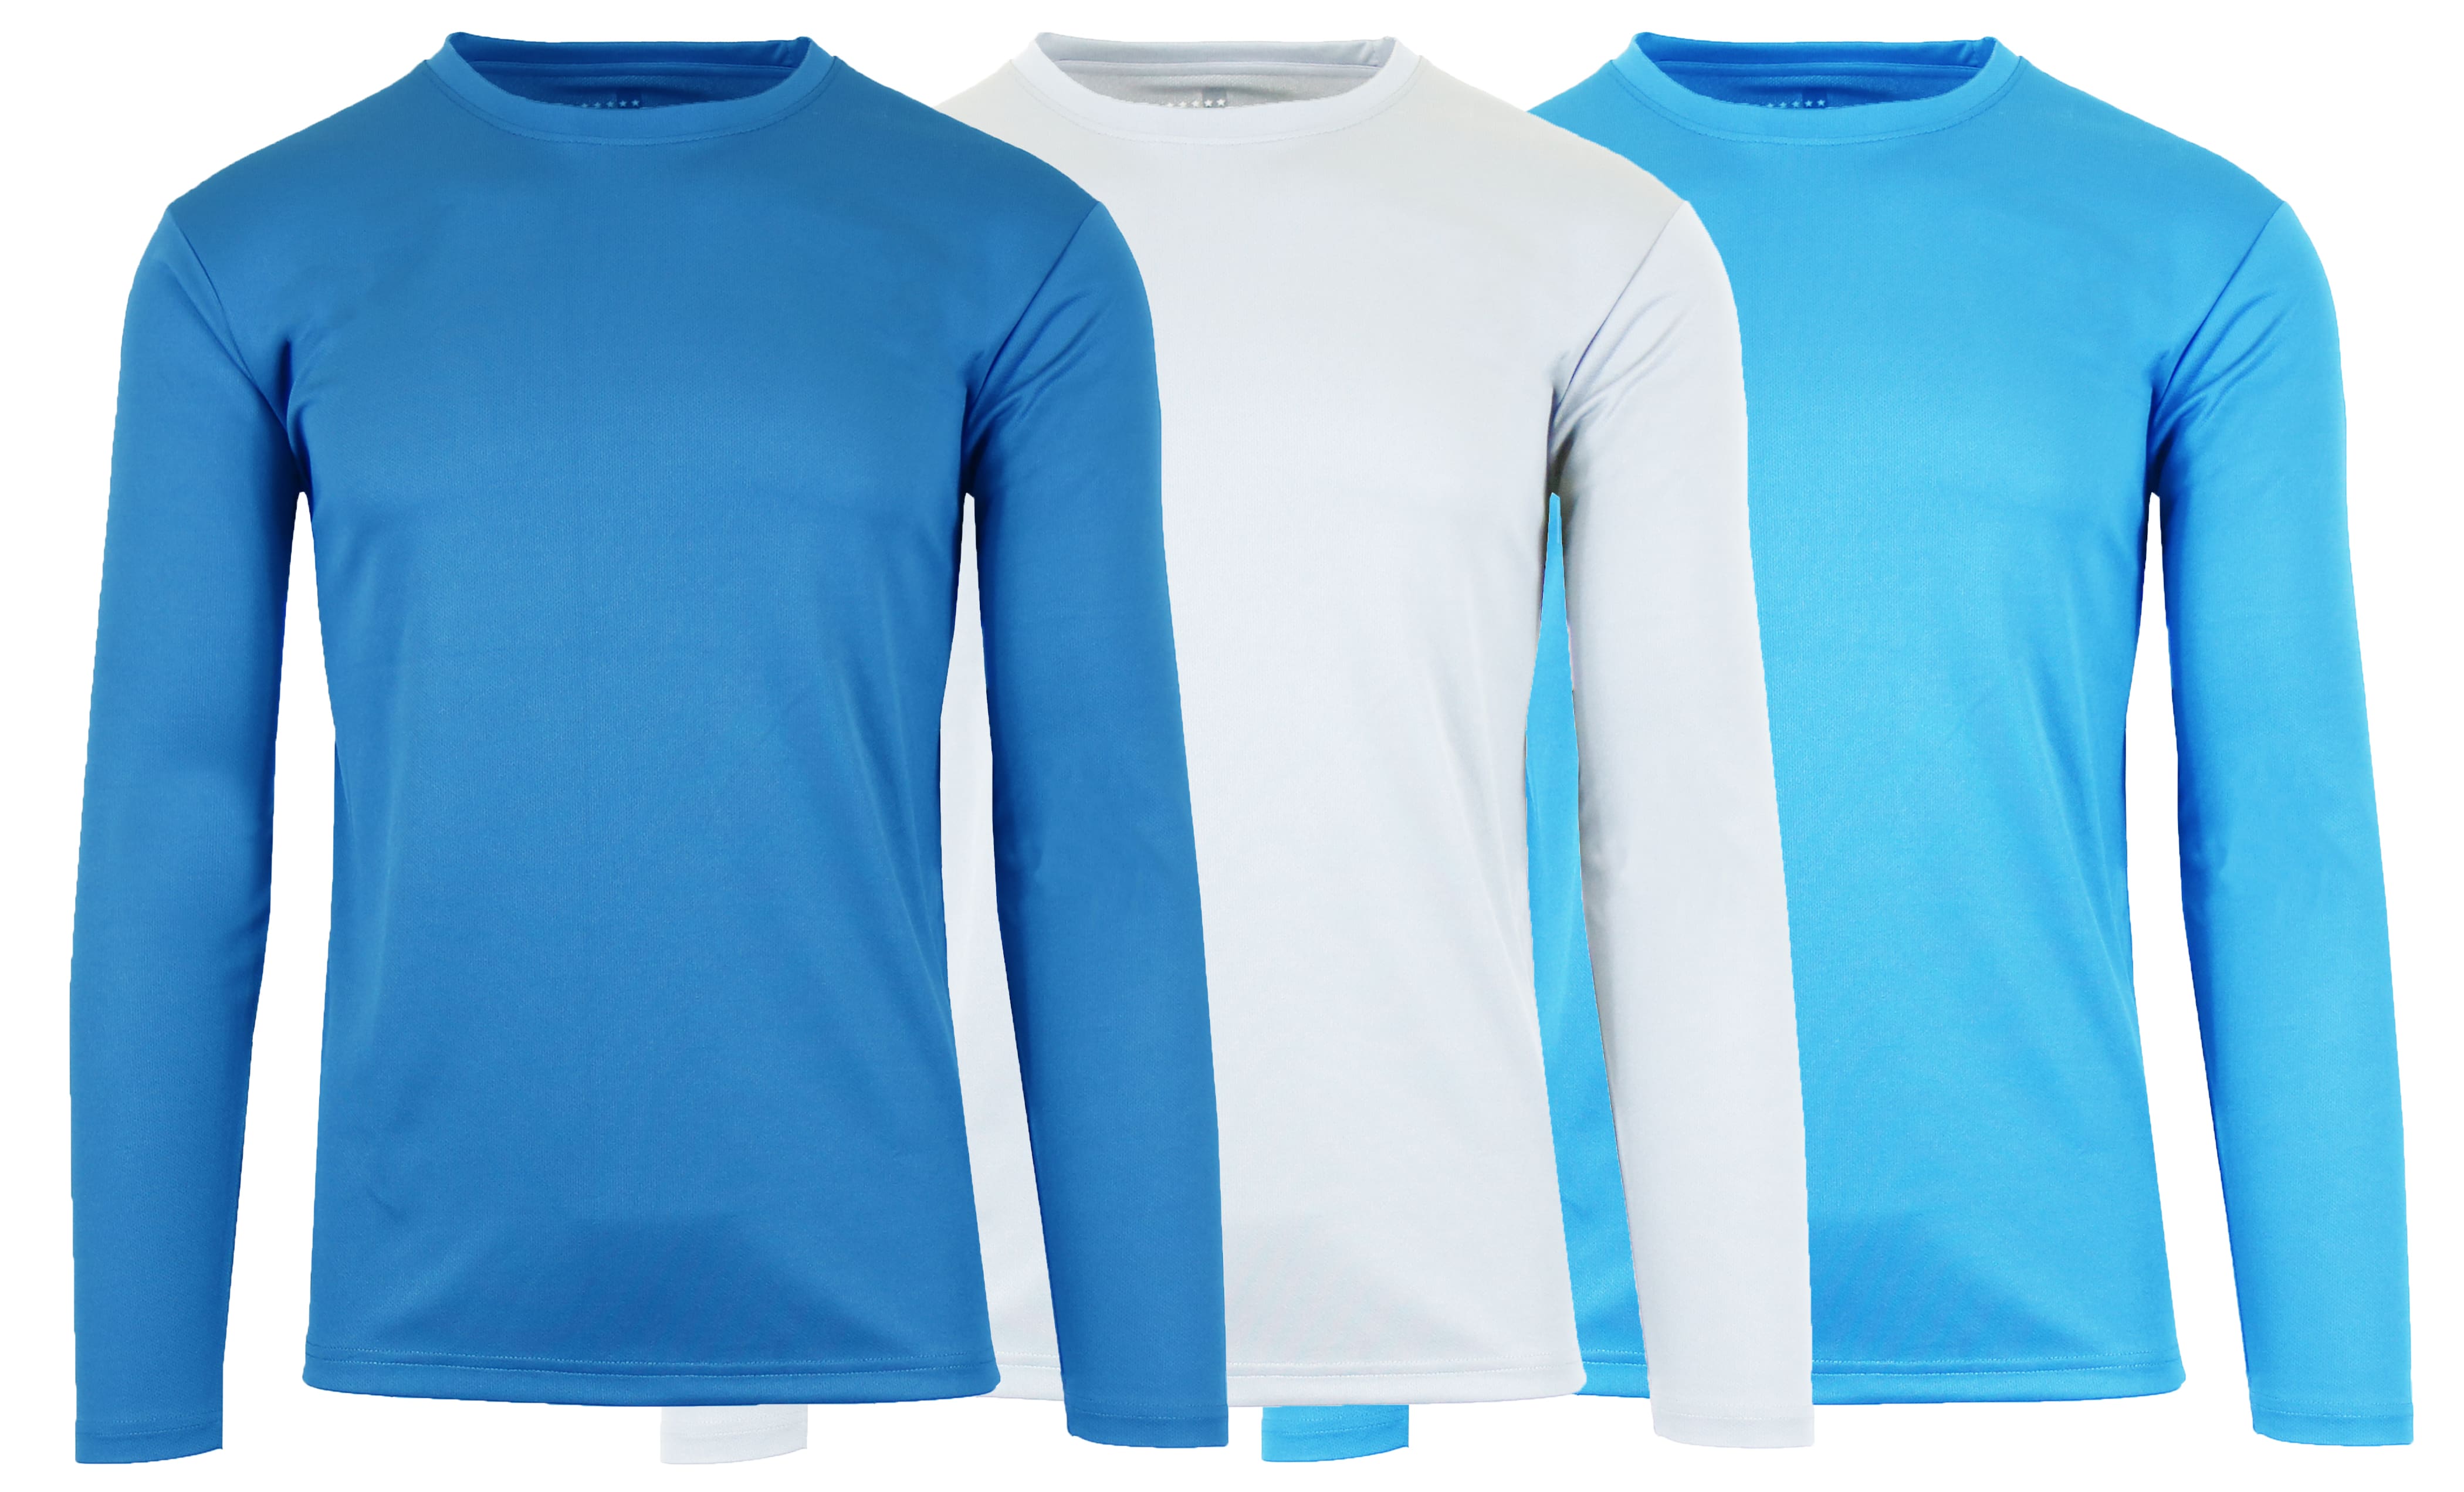 Galaxy by Harvic Long Sleeve Moisture-Wicking Performance Crew Neck Men's T-Shirt 3 Pack